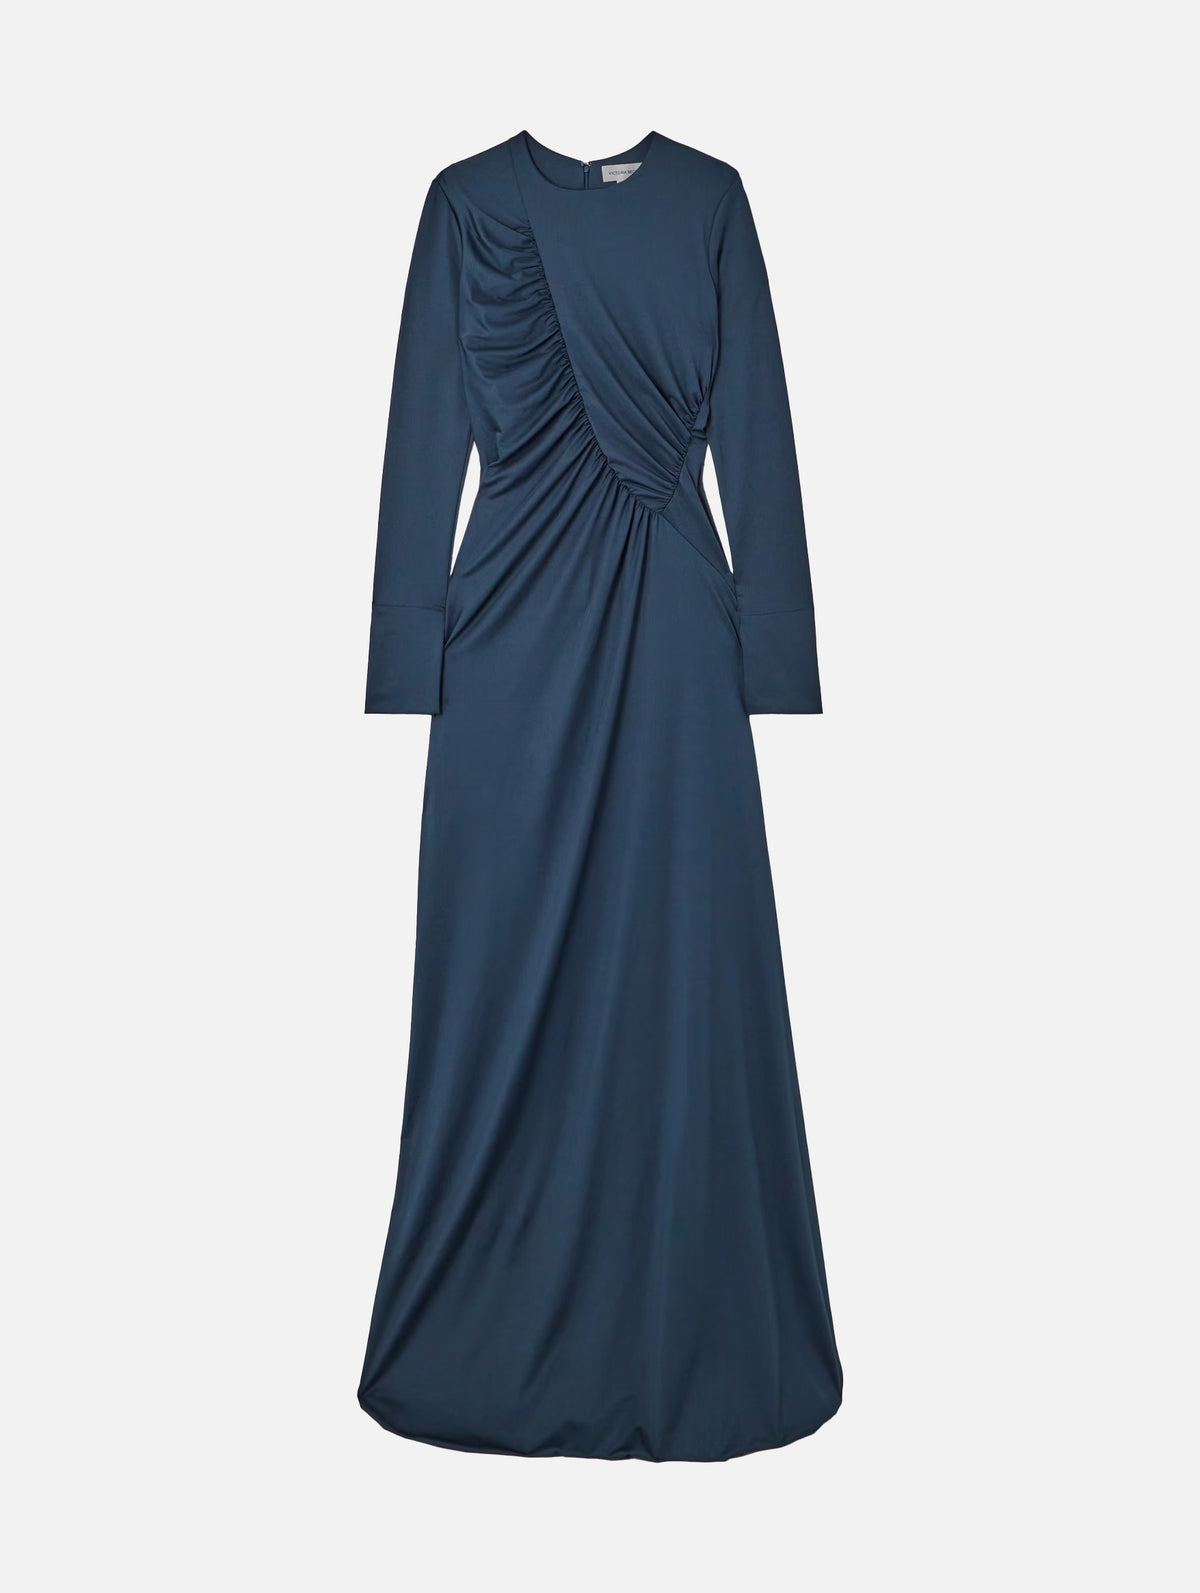 Ruched Detail Gown in Midnight